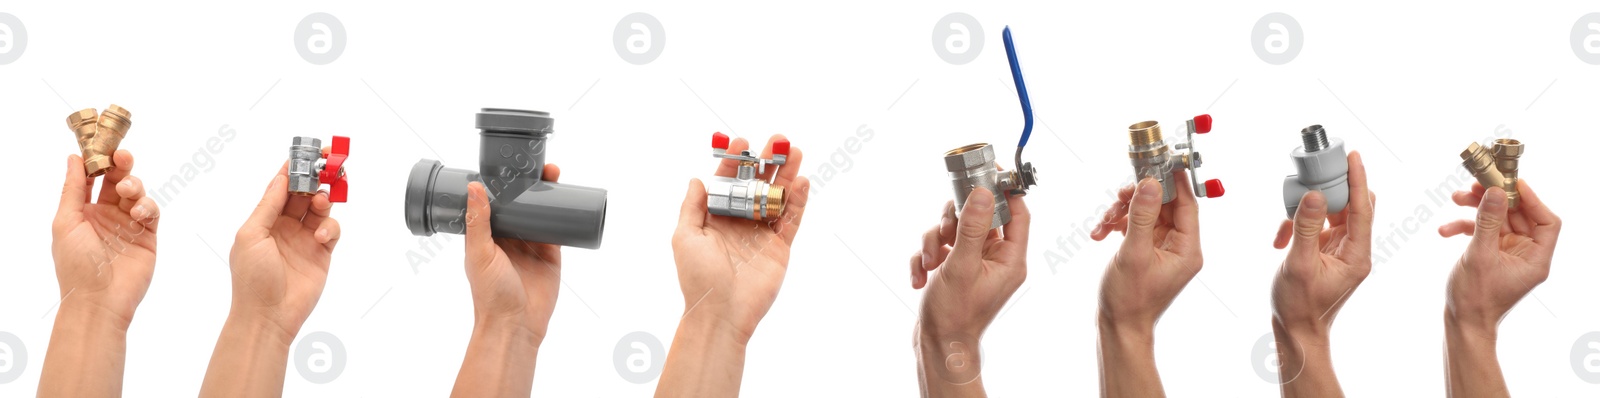 Image of Collage with photos of plumbers holding different valves and pipe fittings on white background. Banner design